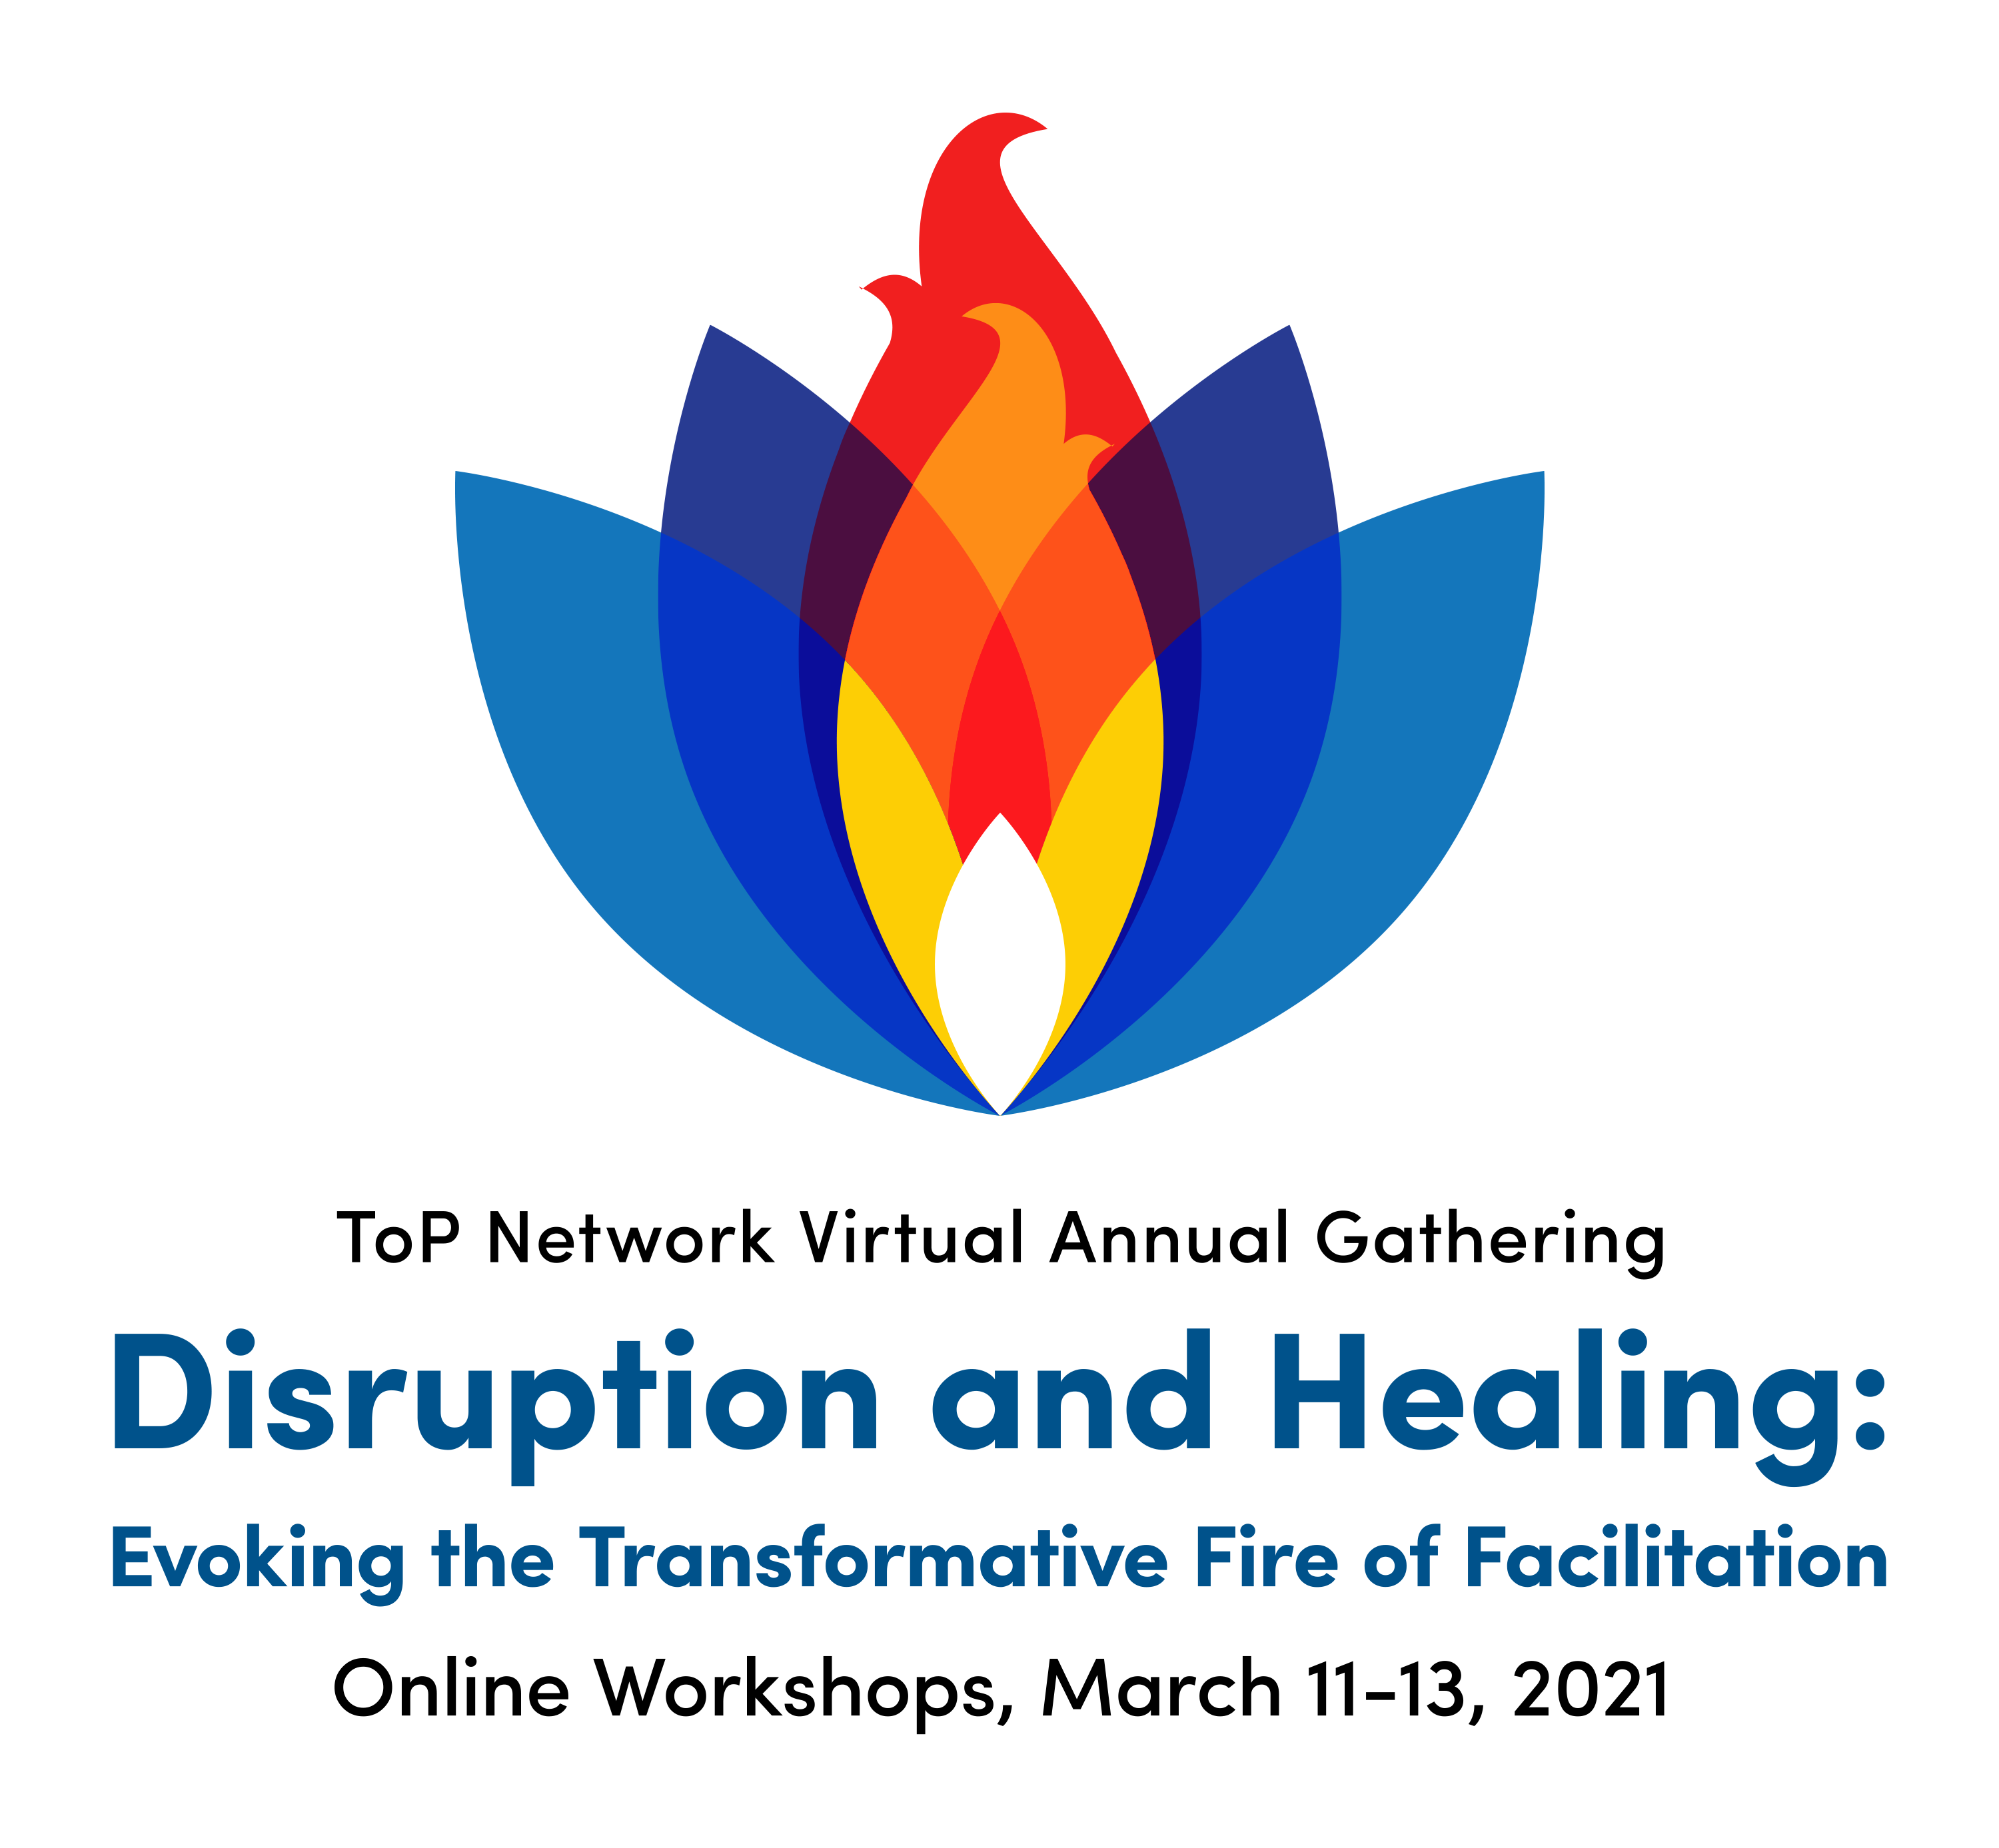 ToP Network Virtual Annual Gathering: Disruption and Healing: Evoking the Transformative Fire of Facilitation: Online Workshops, March 11-13, 2021